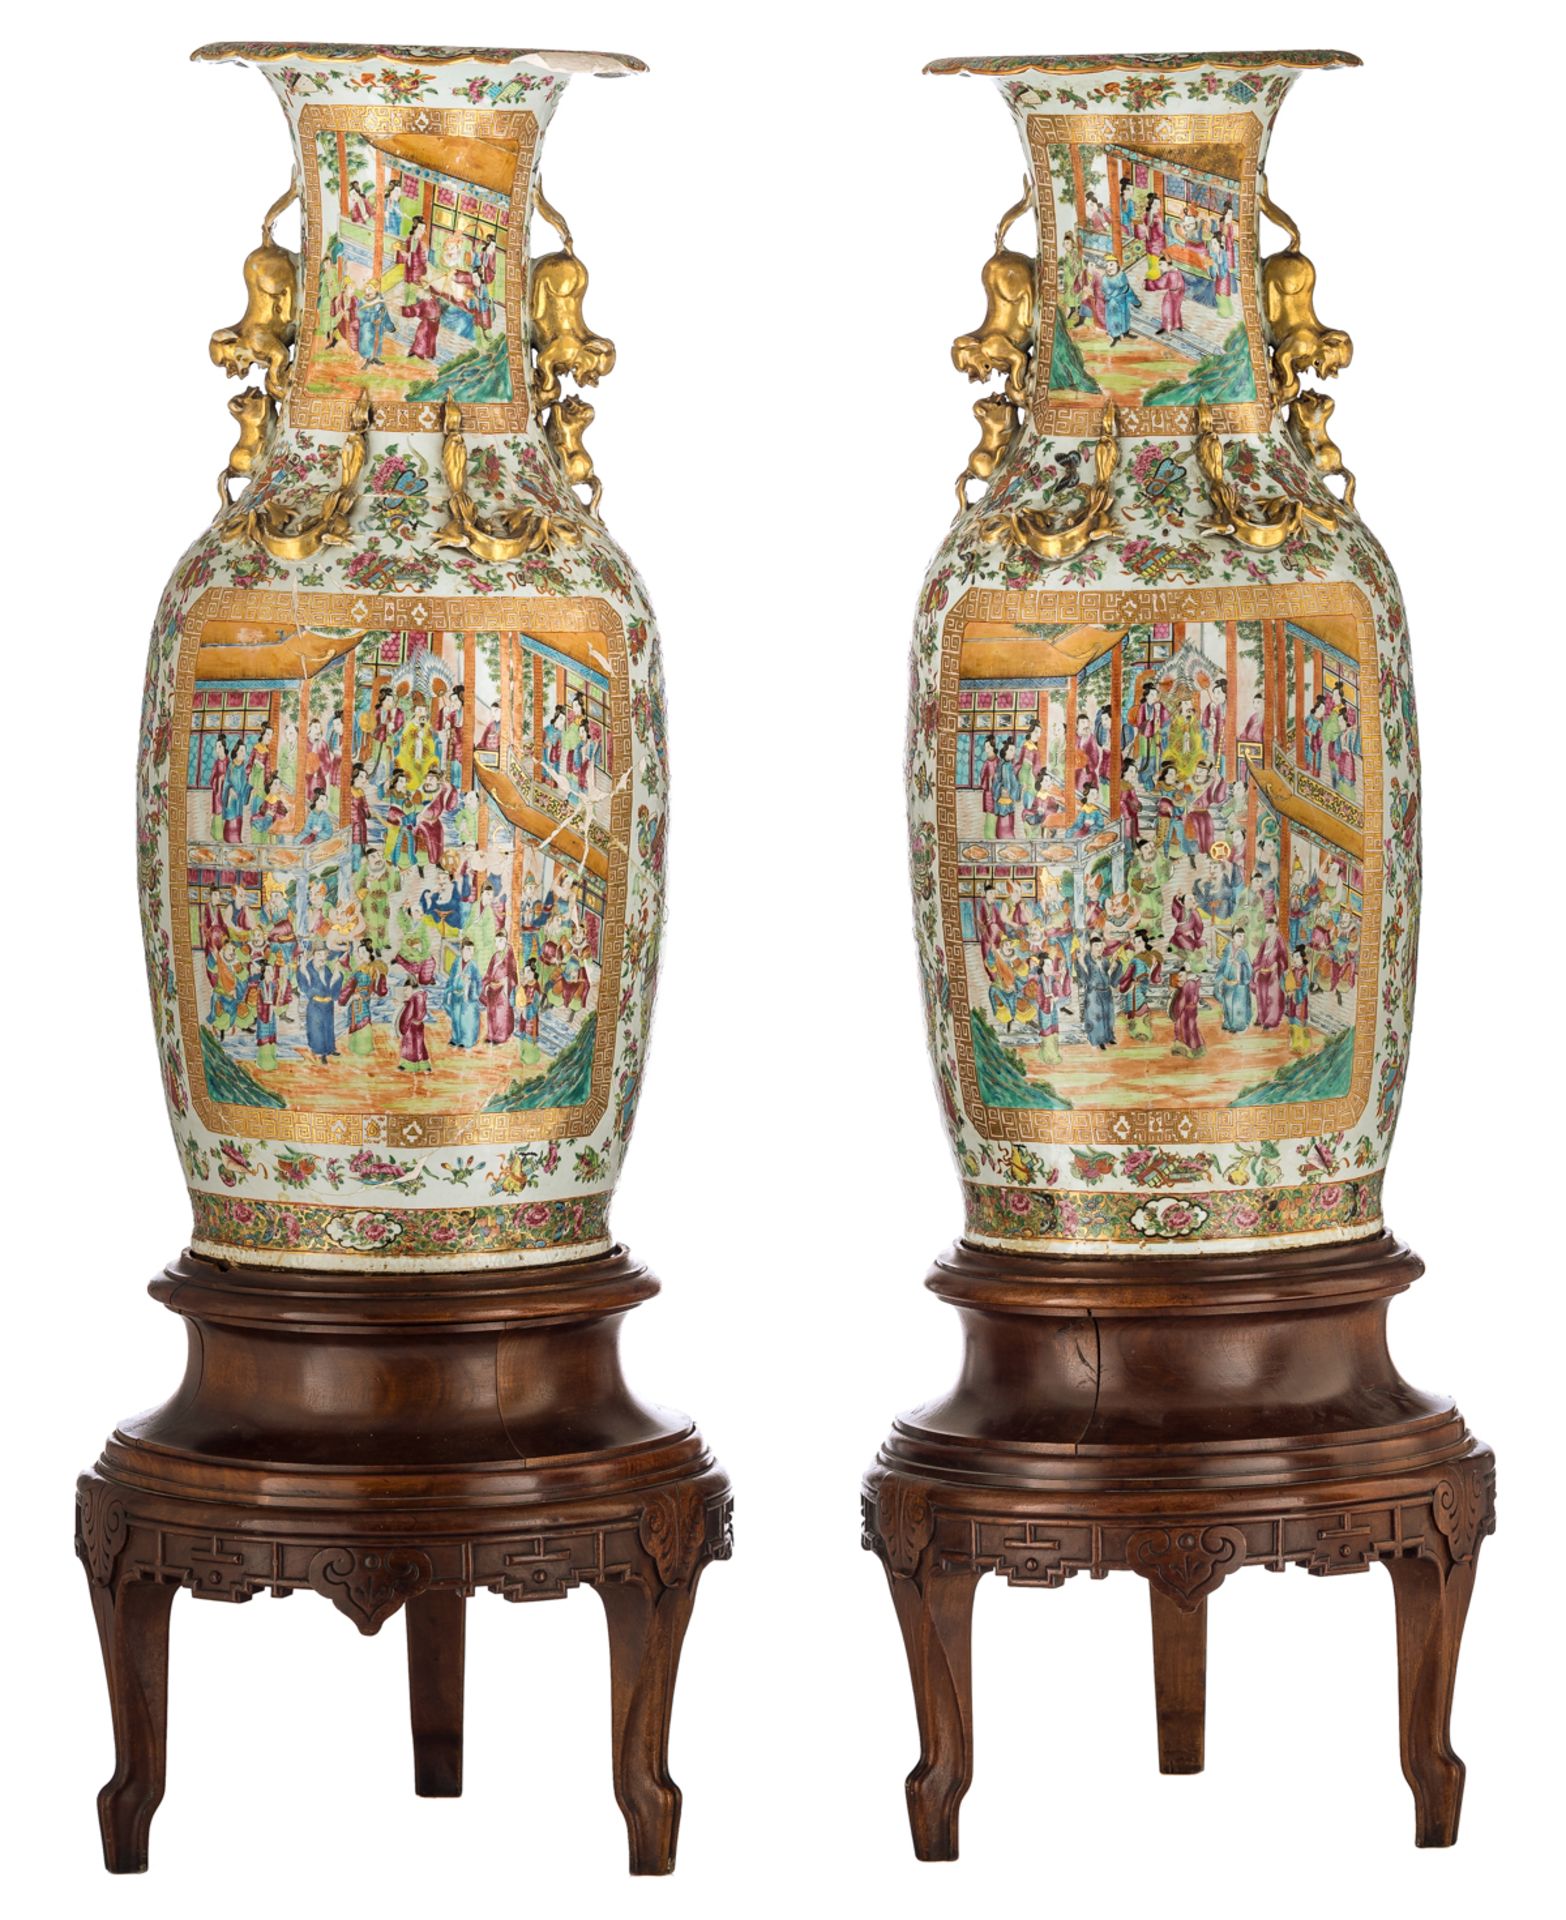 Two large Chinese famille rose floral and relief decorated Canton vases, the roundels with animated